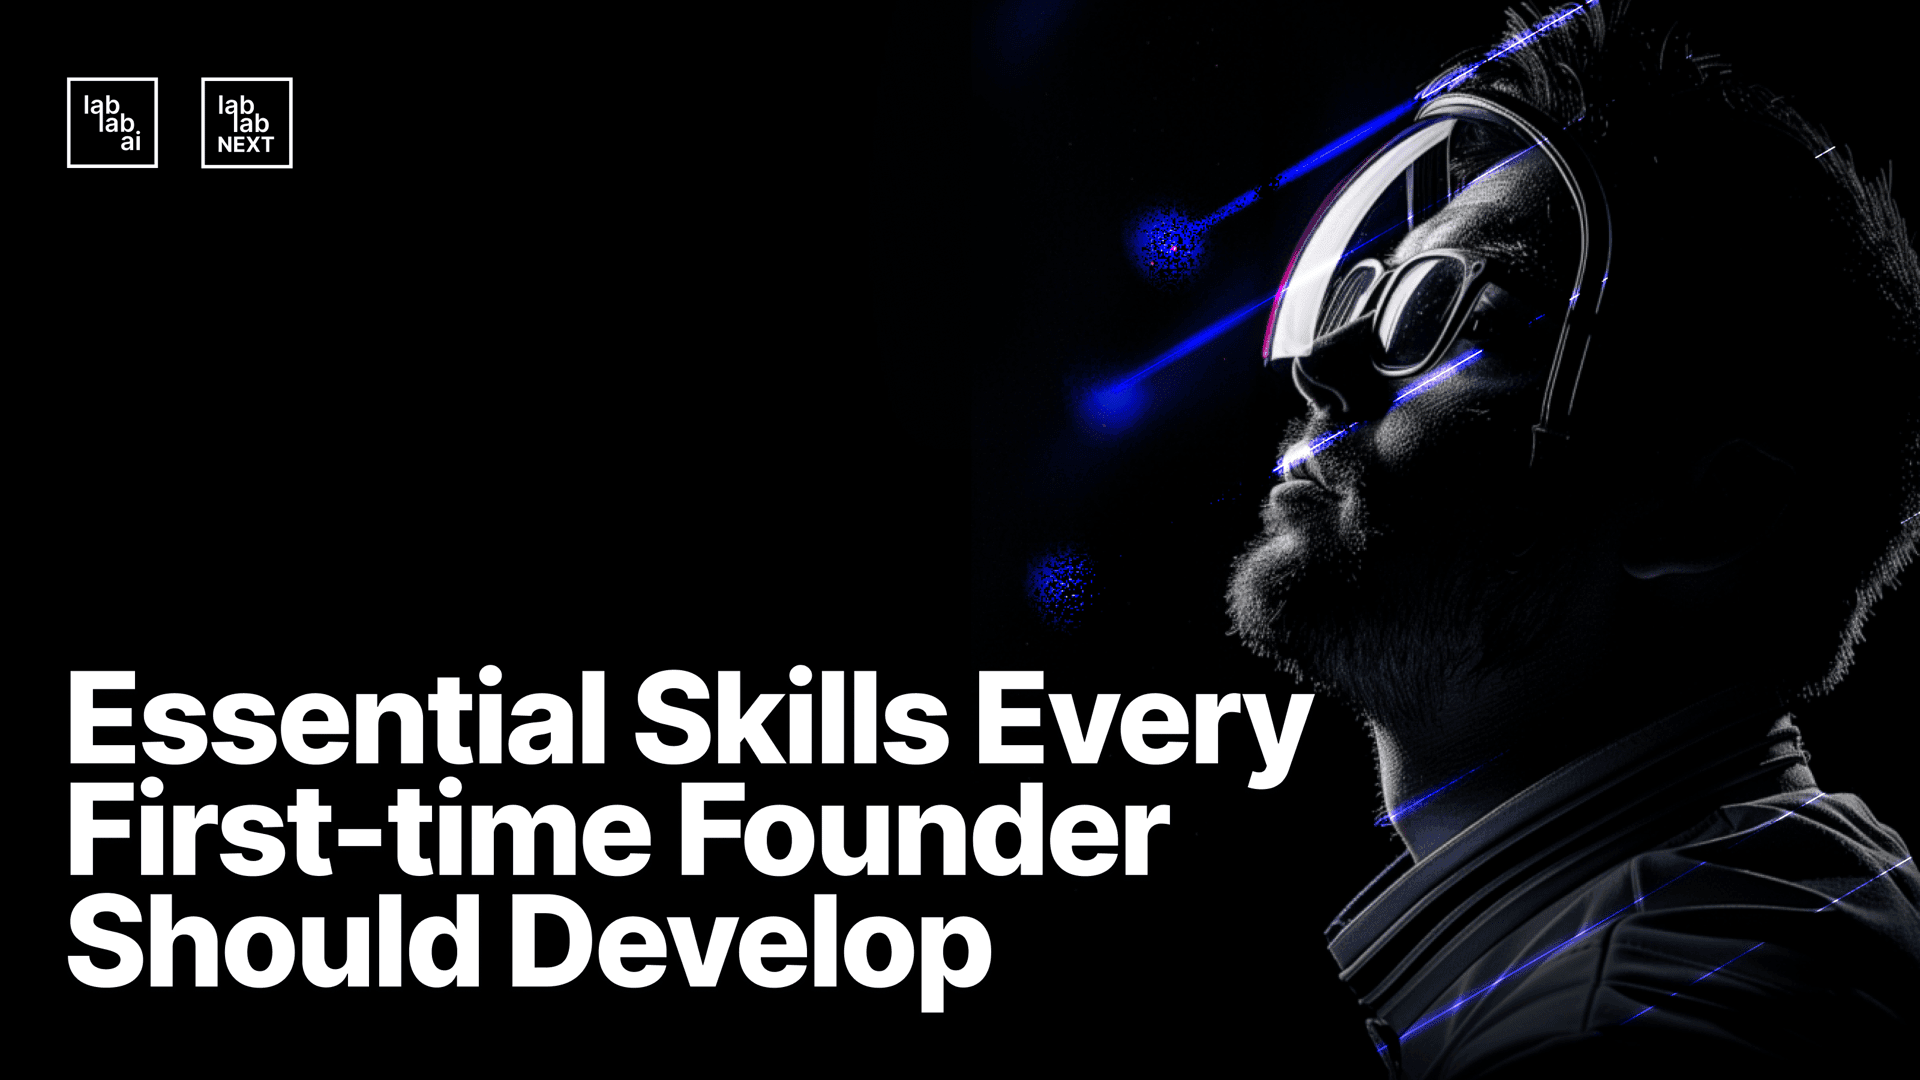 Essential Skills Every First-time Founder Should Develop